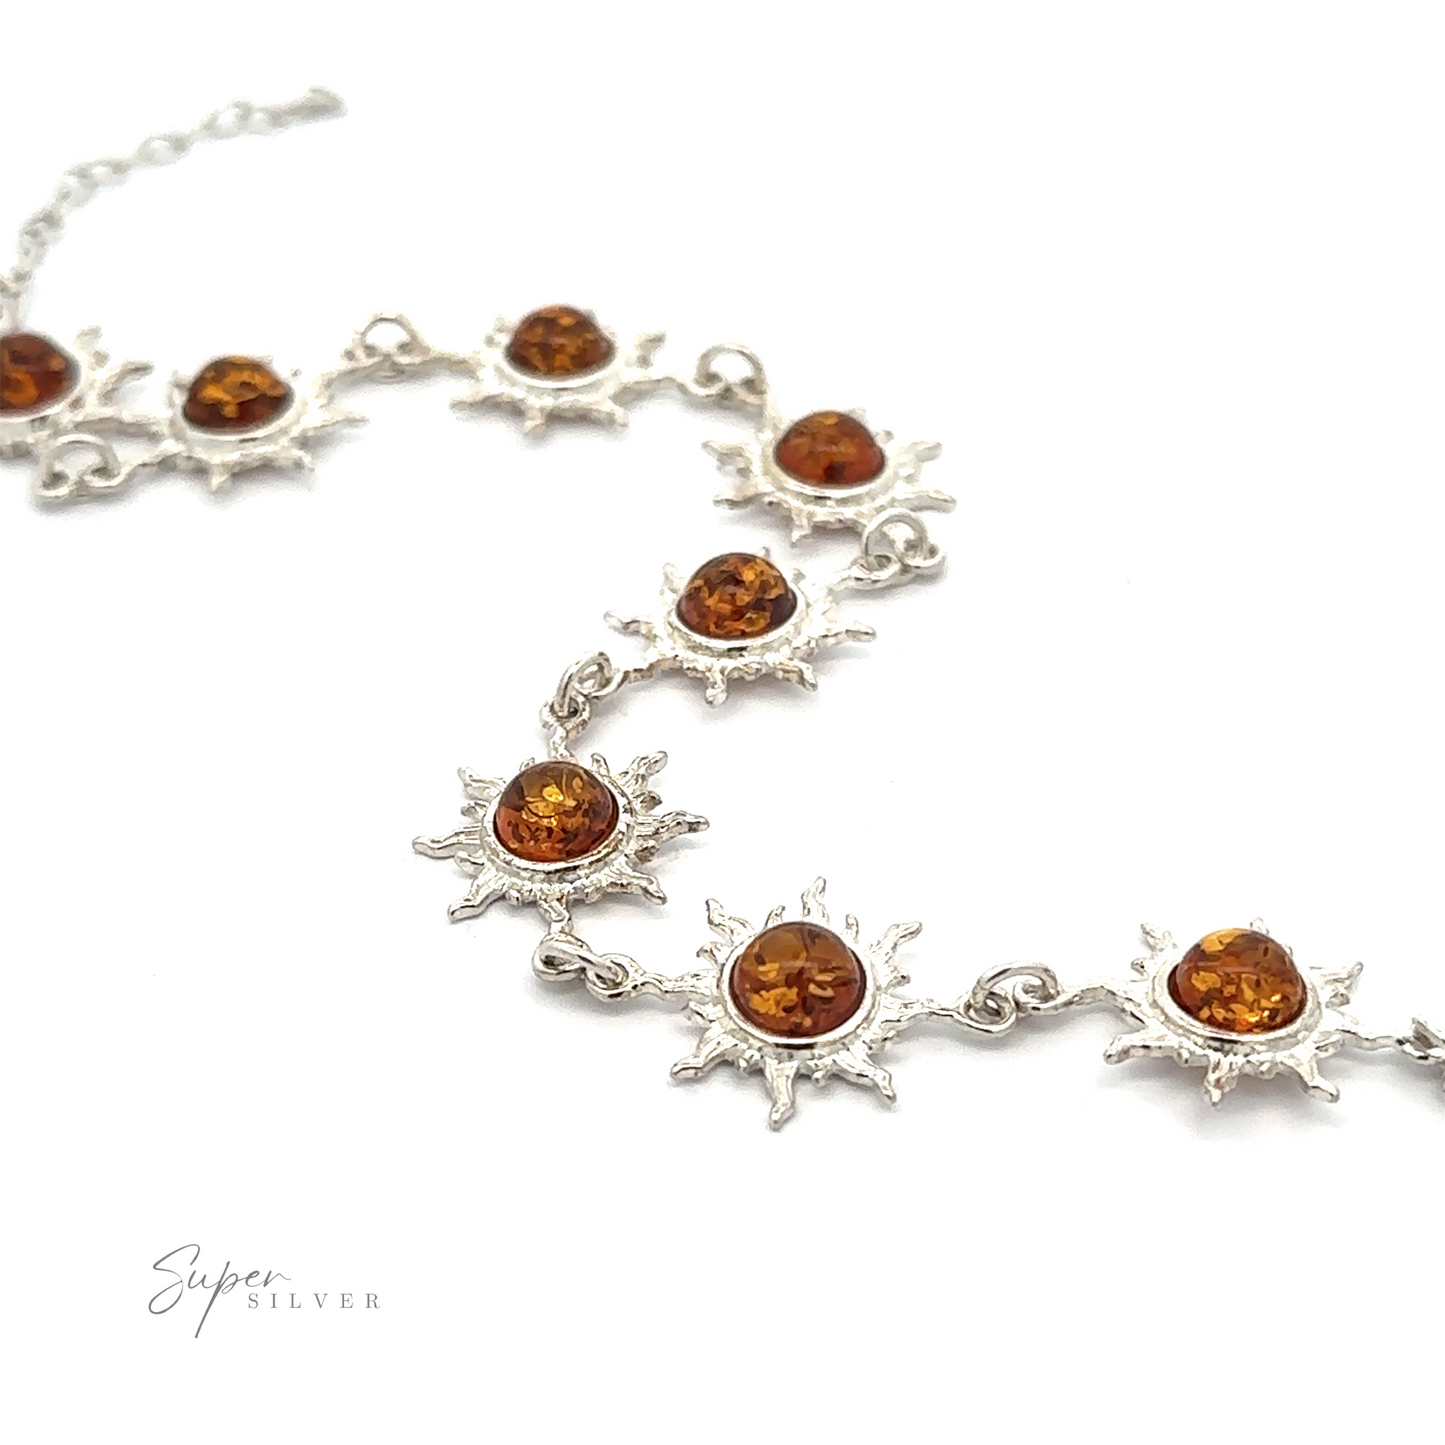 
                  
                    A sterling silver bracelet featuring sun-shaped designs with amber-like stones in the center, displayed on a white background. The brand name "Super Silver" is visible in the bottom left corner, showcasing this exquisite piece of Sparkling Amber Sun Bracelet craftsmanship.
                  
                